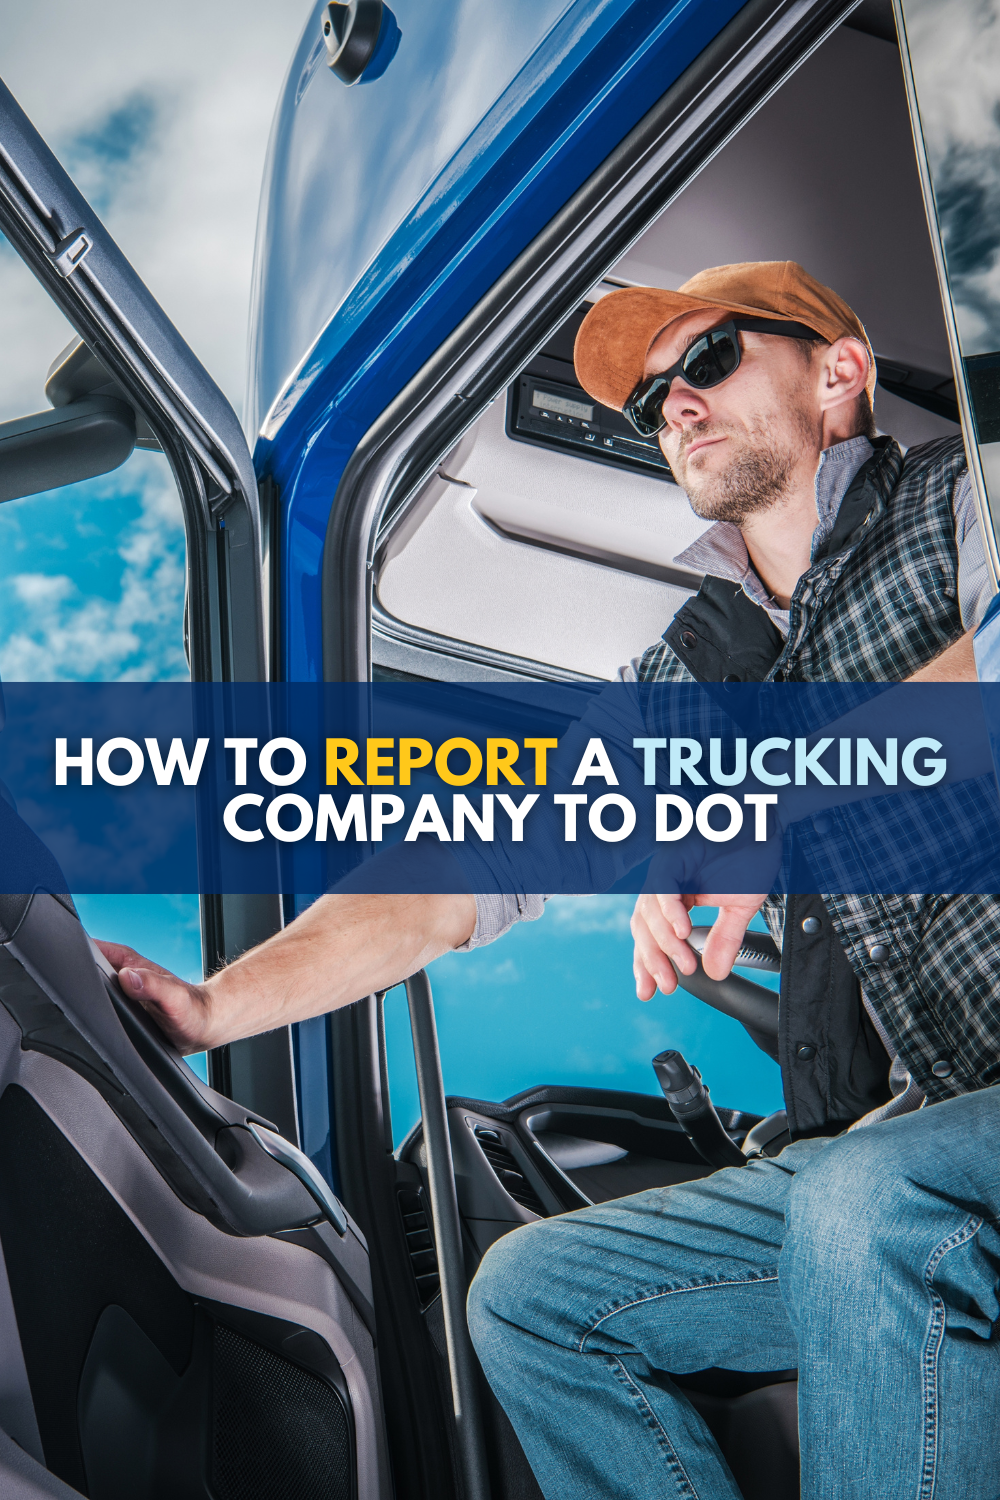 How To Report A Trucking Company To DOT: 3 Actions To Take